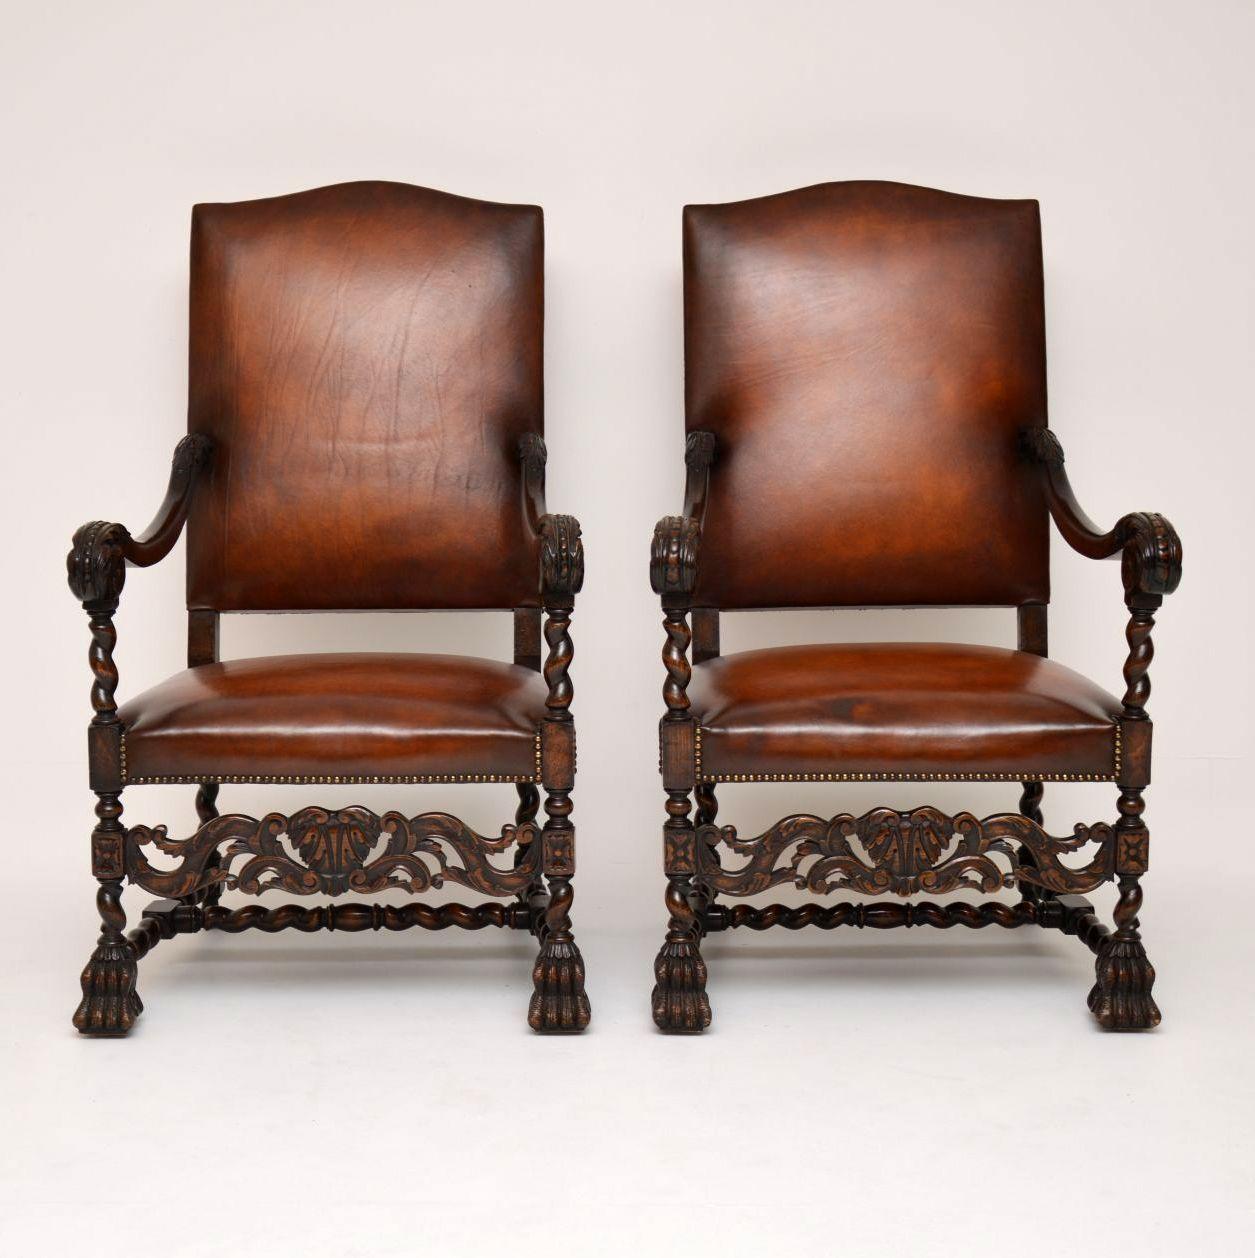 Impressive pair of antique leather upholstered Carolean style armchairs on carved oak frames in excellent condition and dating from the 1890s period. Take an enlarged look at the wonderful carvings, especially below the seats. They have lots of